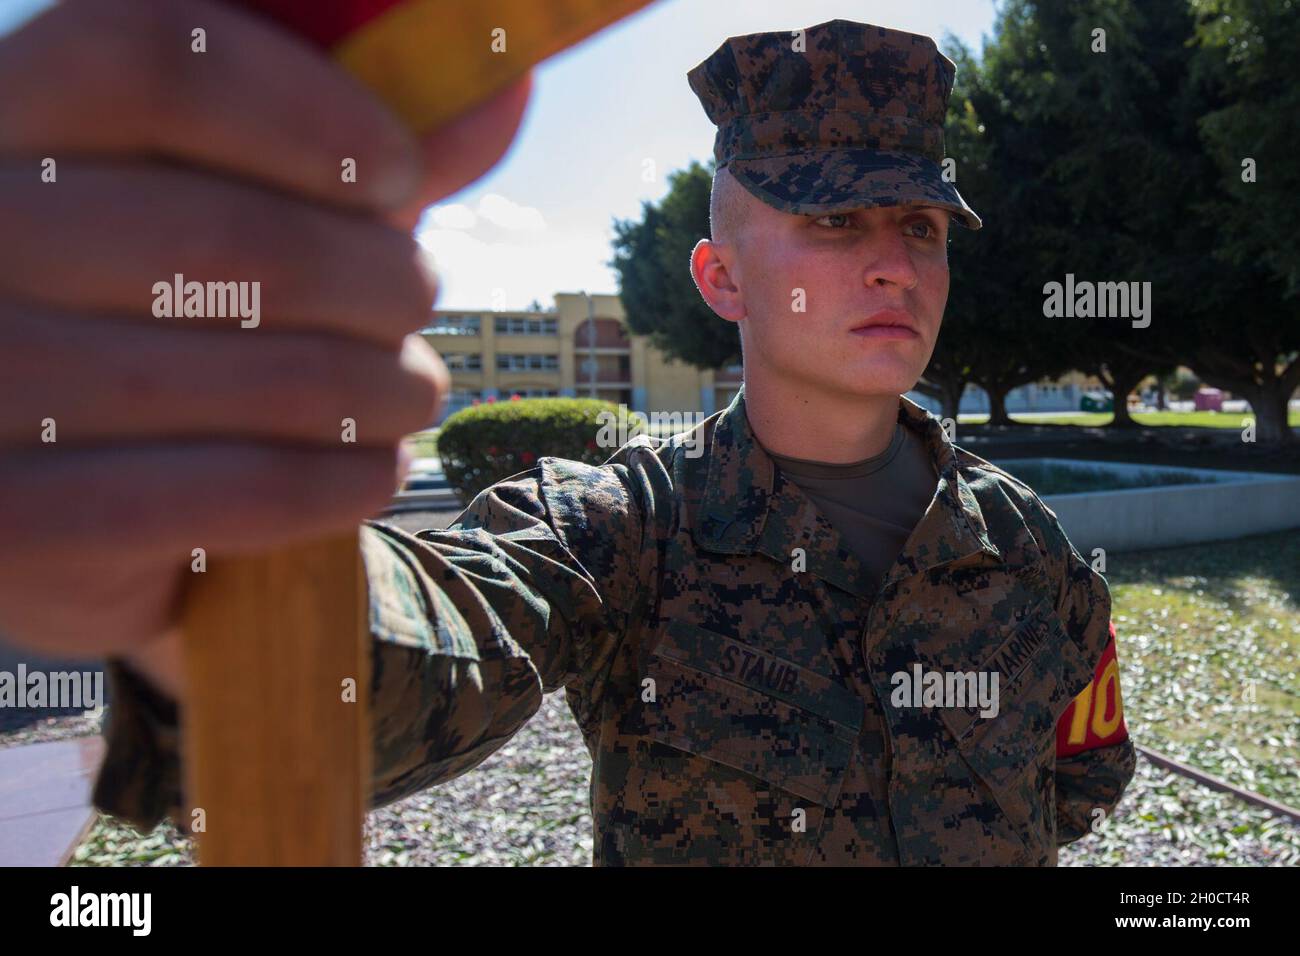 Pfc Hayden B Staub A 21-year-old Of Rs Portland From Tulelake California Is Slated To Graduate From Marine Corps Recruit Depot San Diego Jan 26 2021 Pfc Staub Graduated From Hosanna Christian